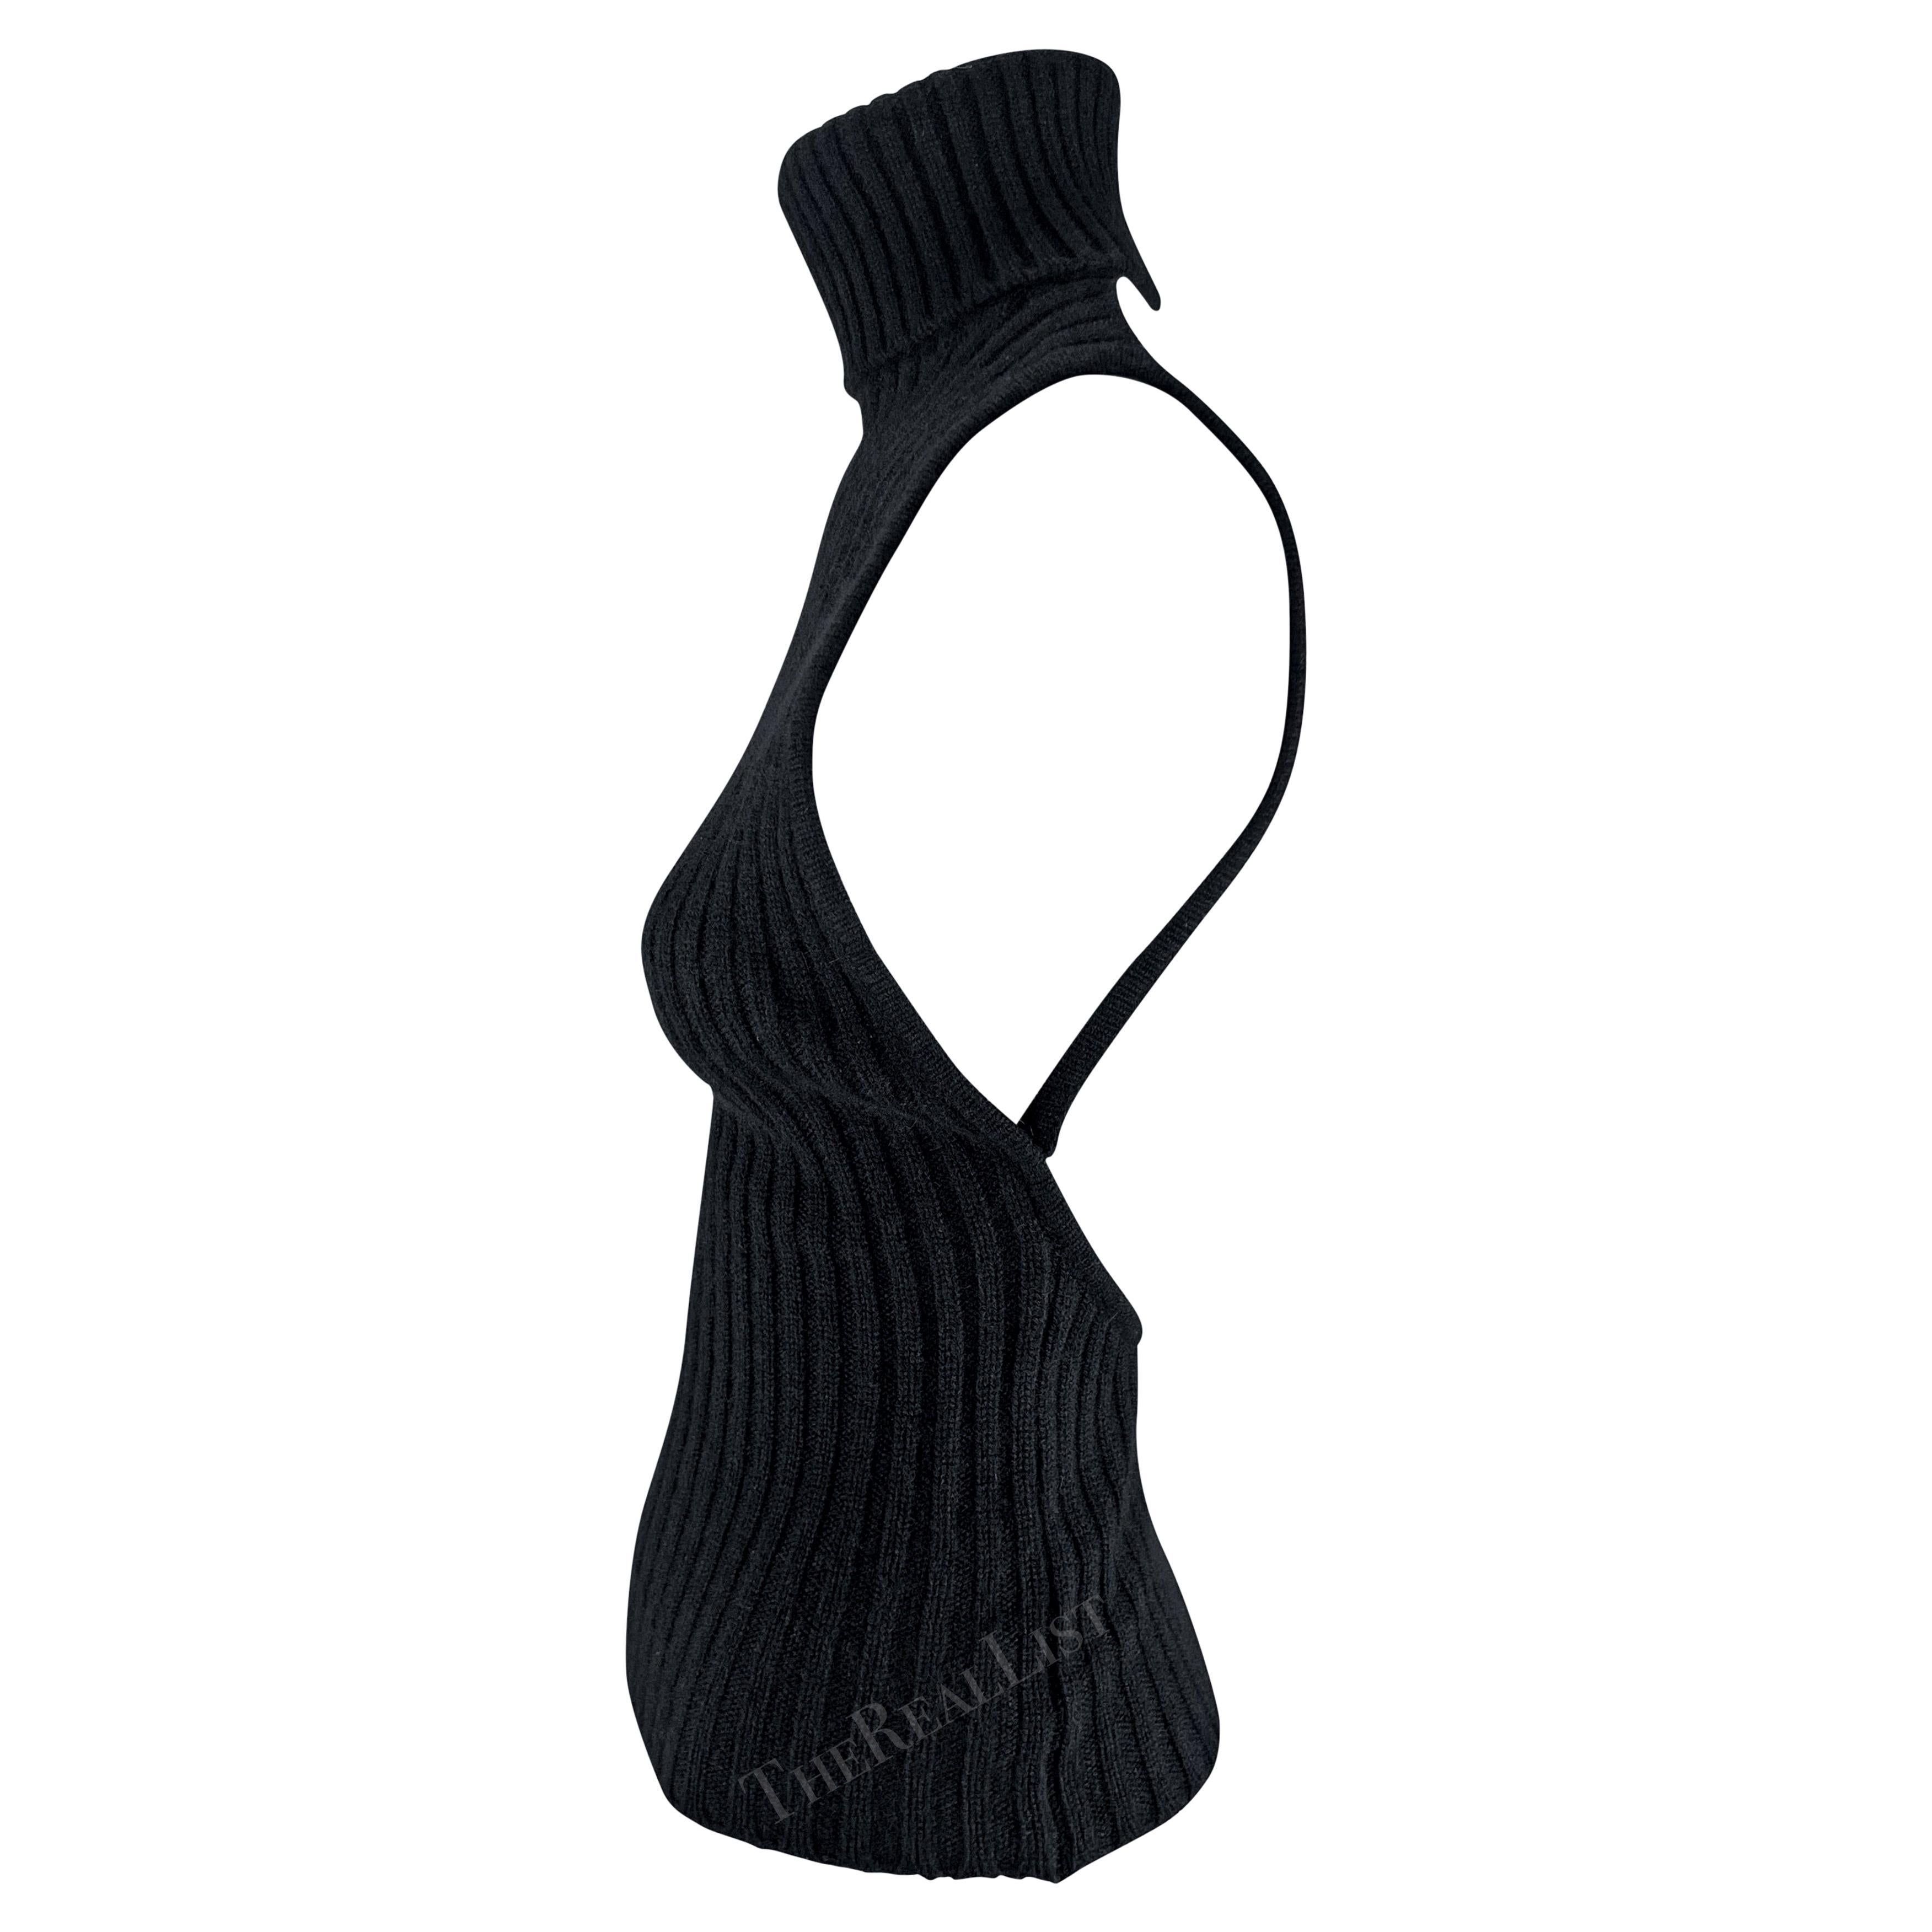 TheRealList presents: an incredible backless cashmere Gucci turtleneck top, designed by Tom Ford. From the late 1990s, this sensual top is constructed entirely of black cashmere. Not your average turtleneck sweater, this ultra-sexy sleeveless and